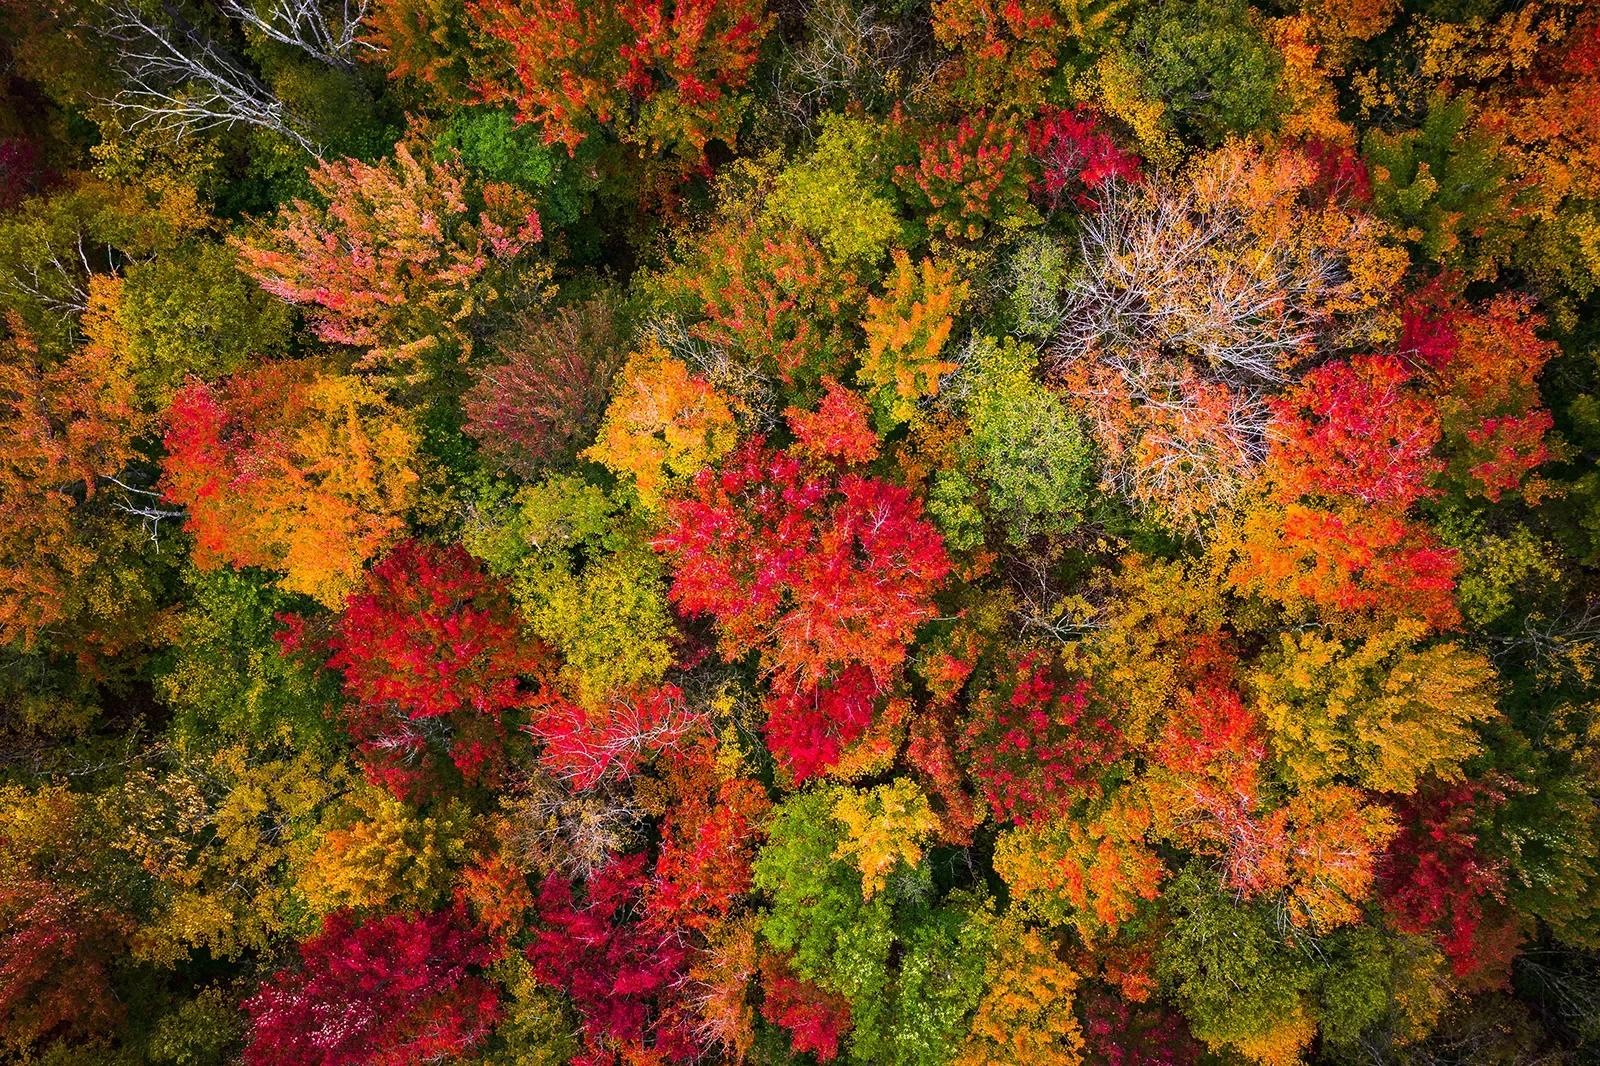 Overhead shot of autumnal, multicolored forest.